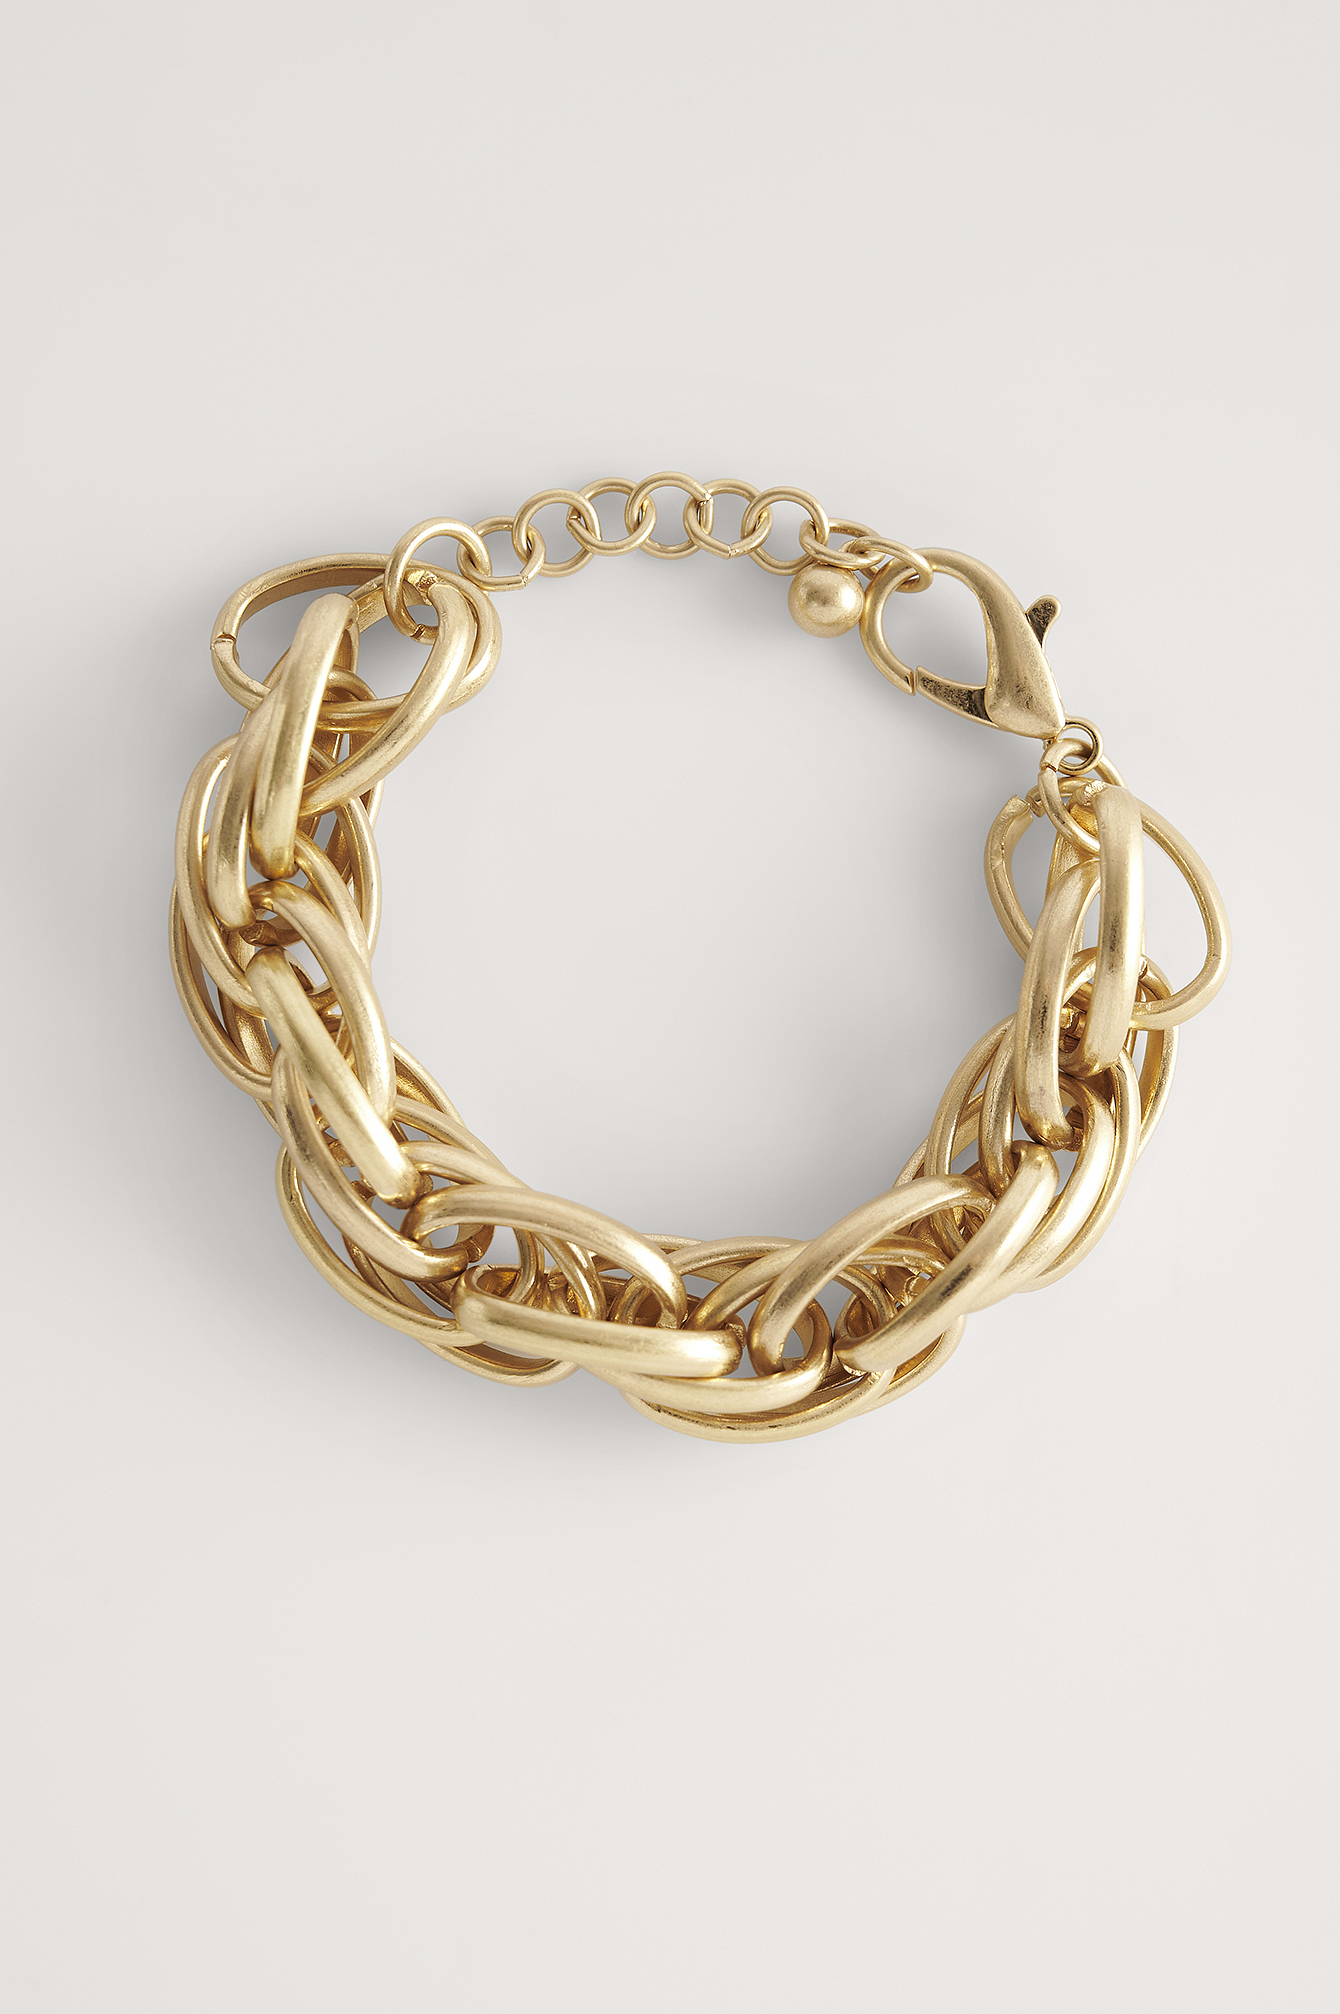 Gold Chubby Connected Chain Bracelet